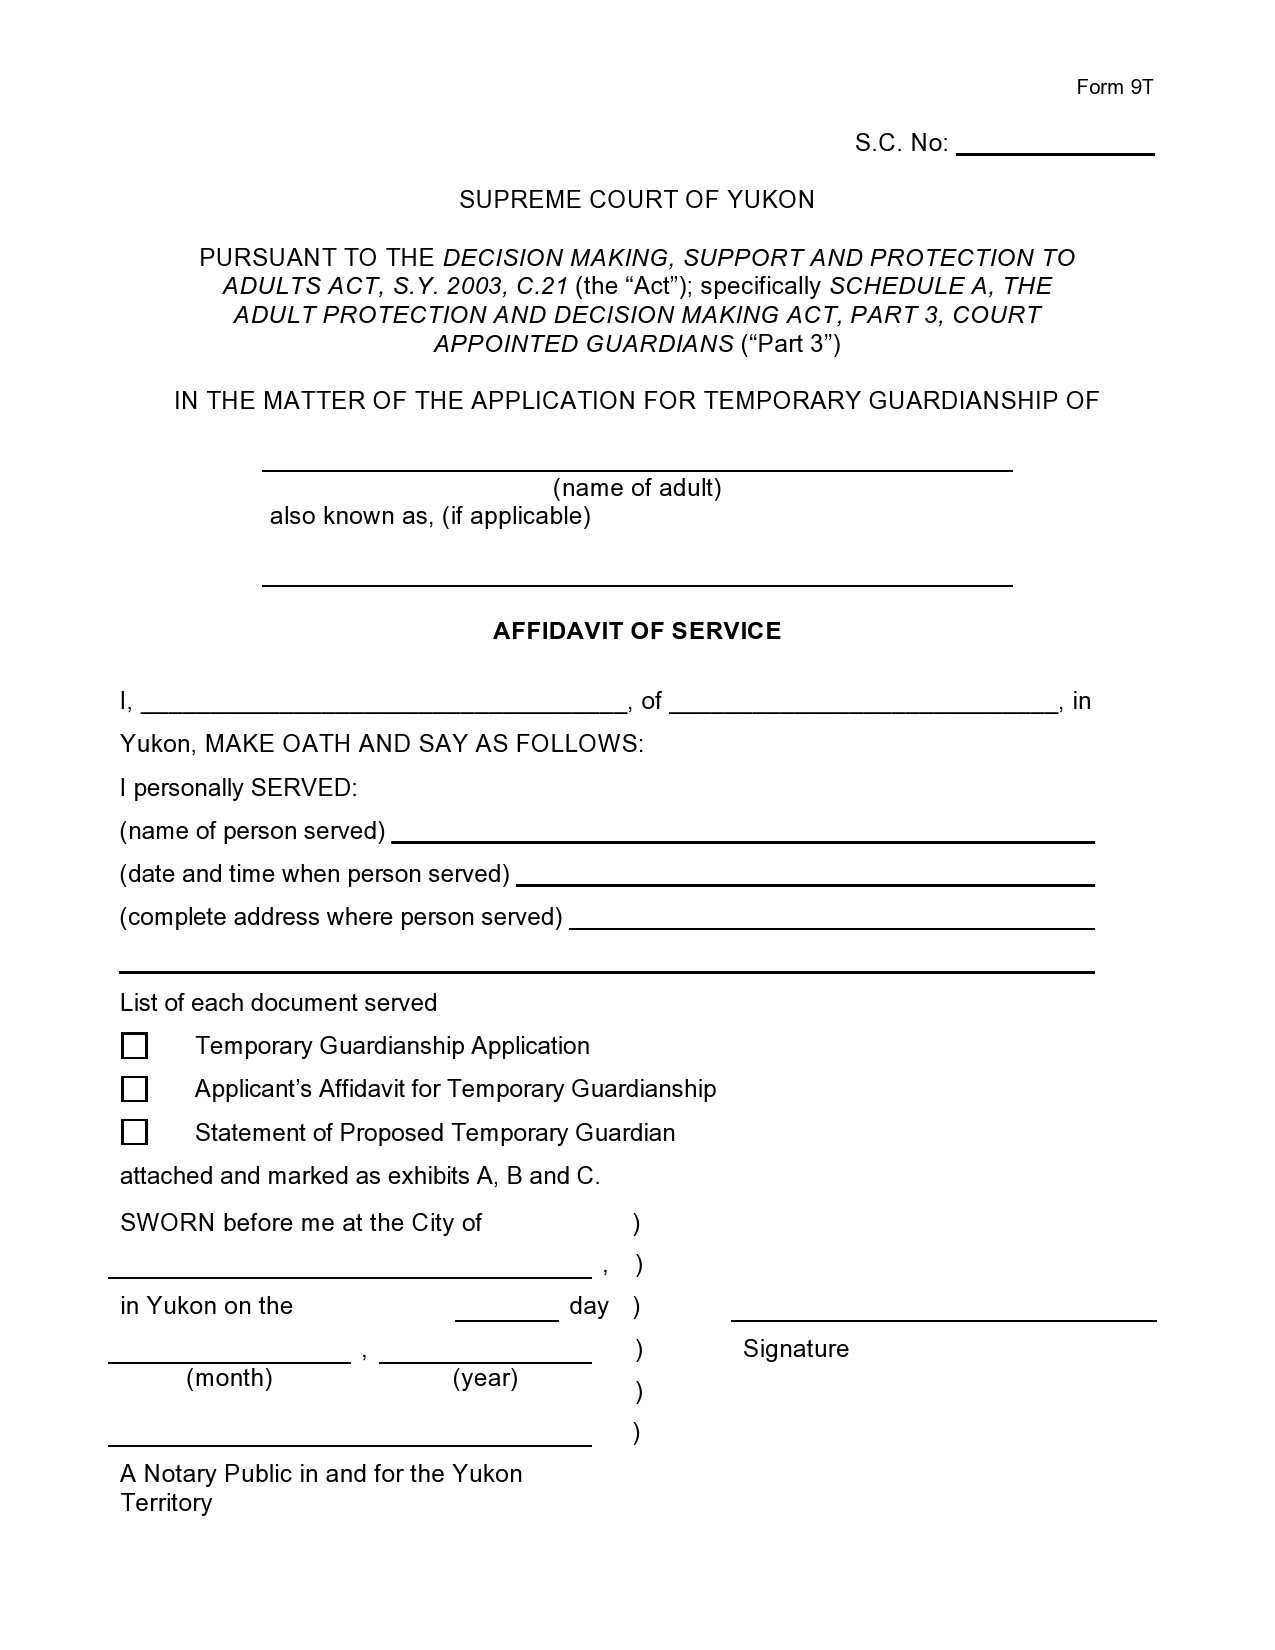 Where Can I Get Temporary Guardianship Forms